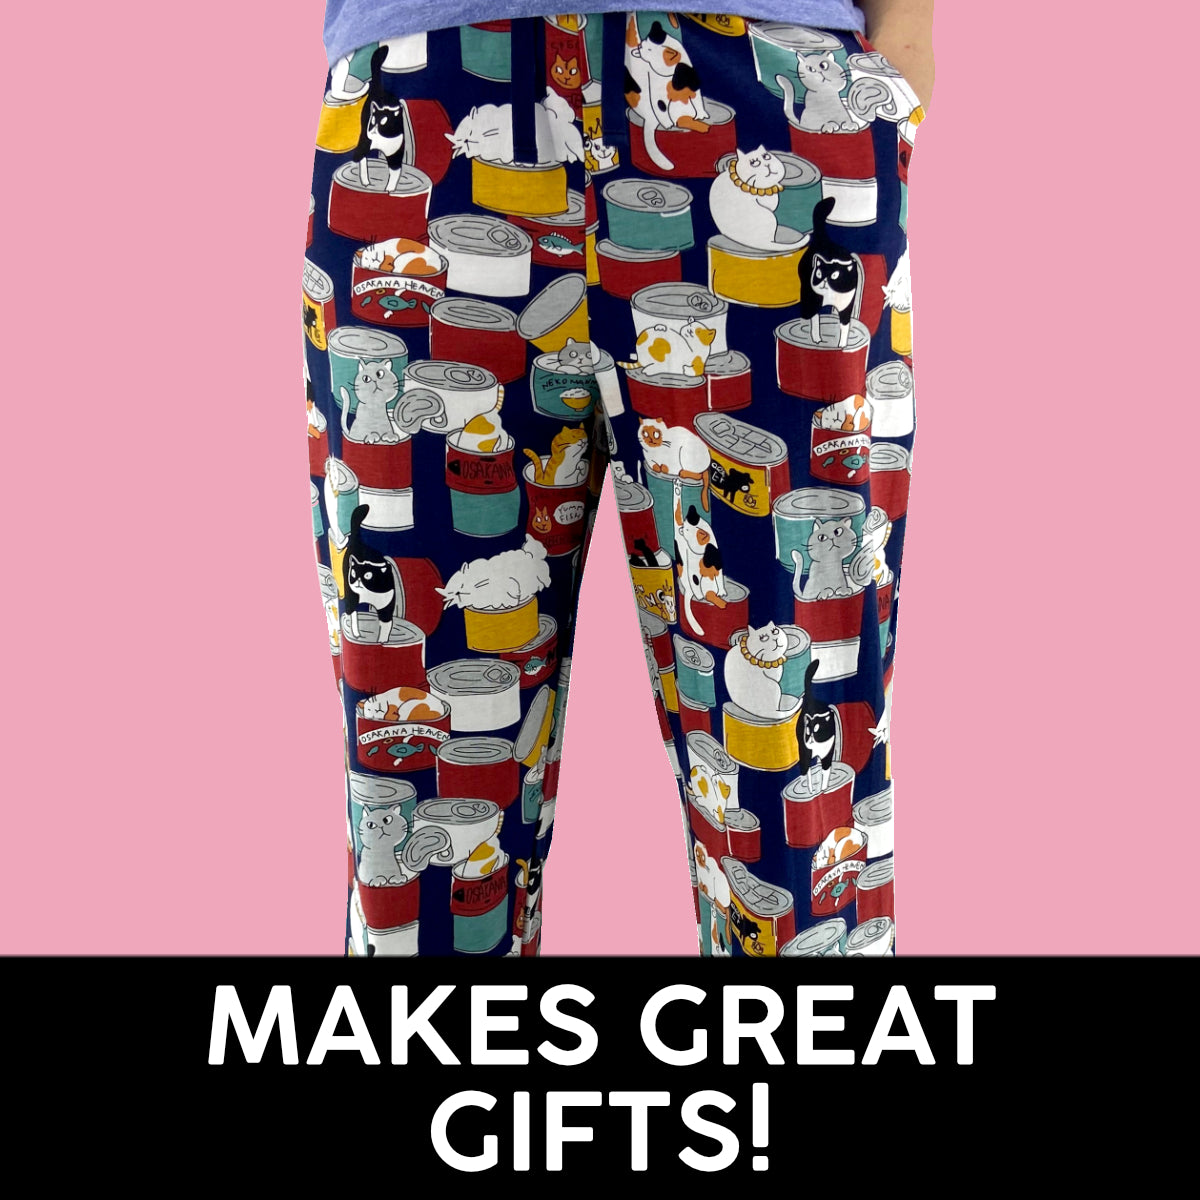 Shop our collection of ultra comfy knit sleep bottoms that doubles as lounge shorts in adorable & unique prints!